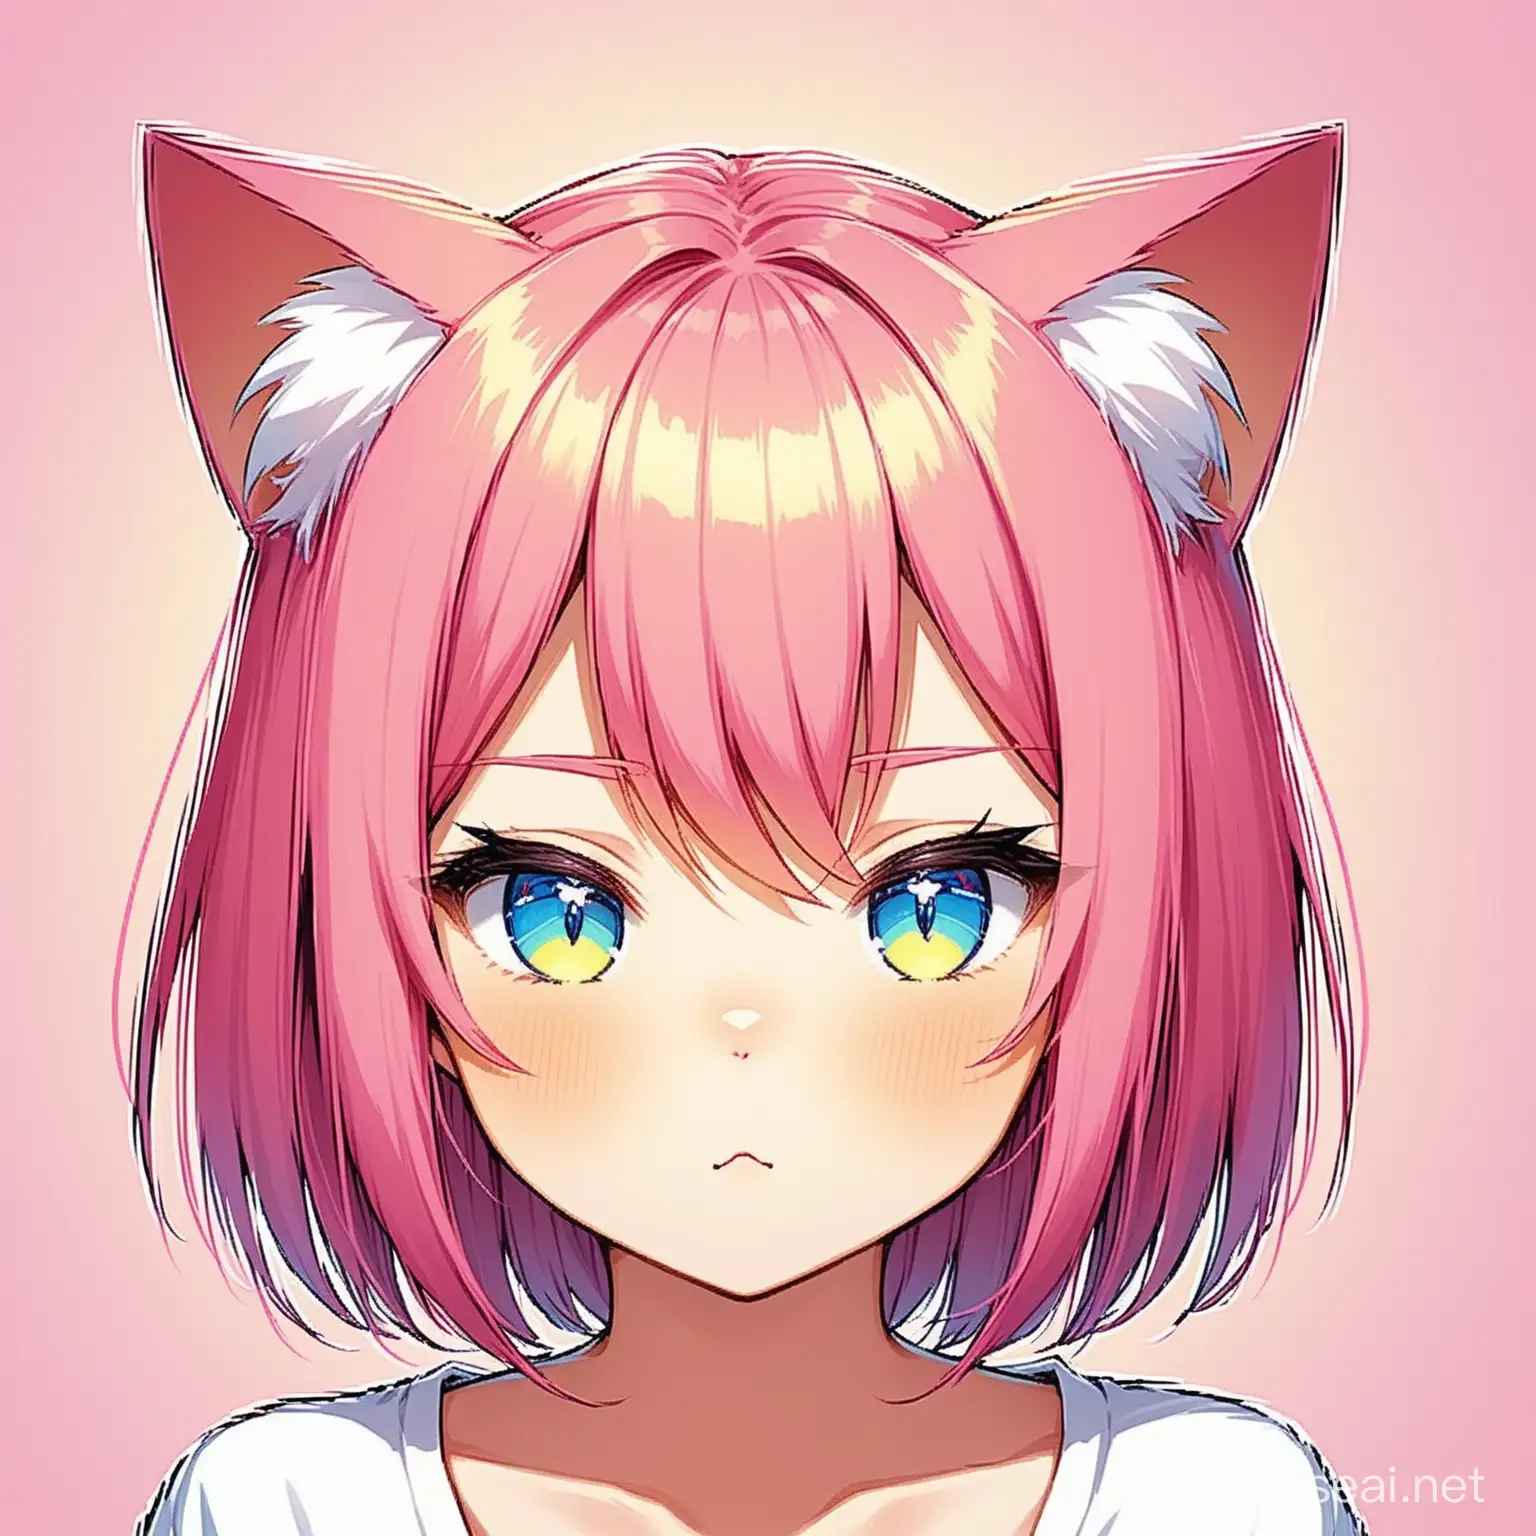 14 year old girl shortish hair pink hair cat ears and cat tail left eye blue right eye yellow